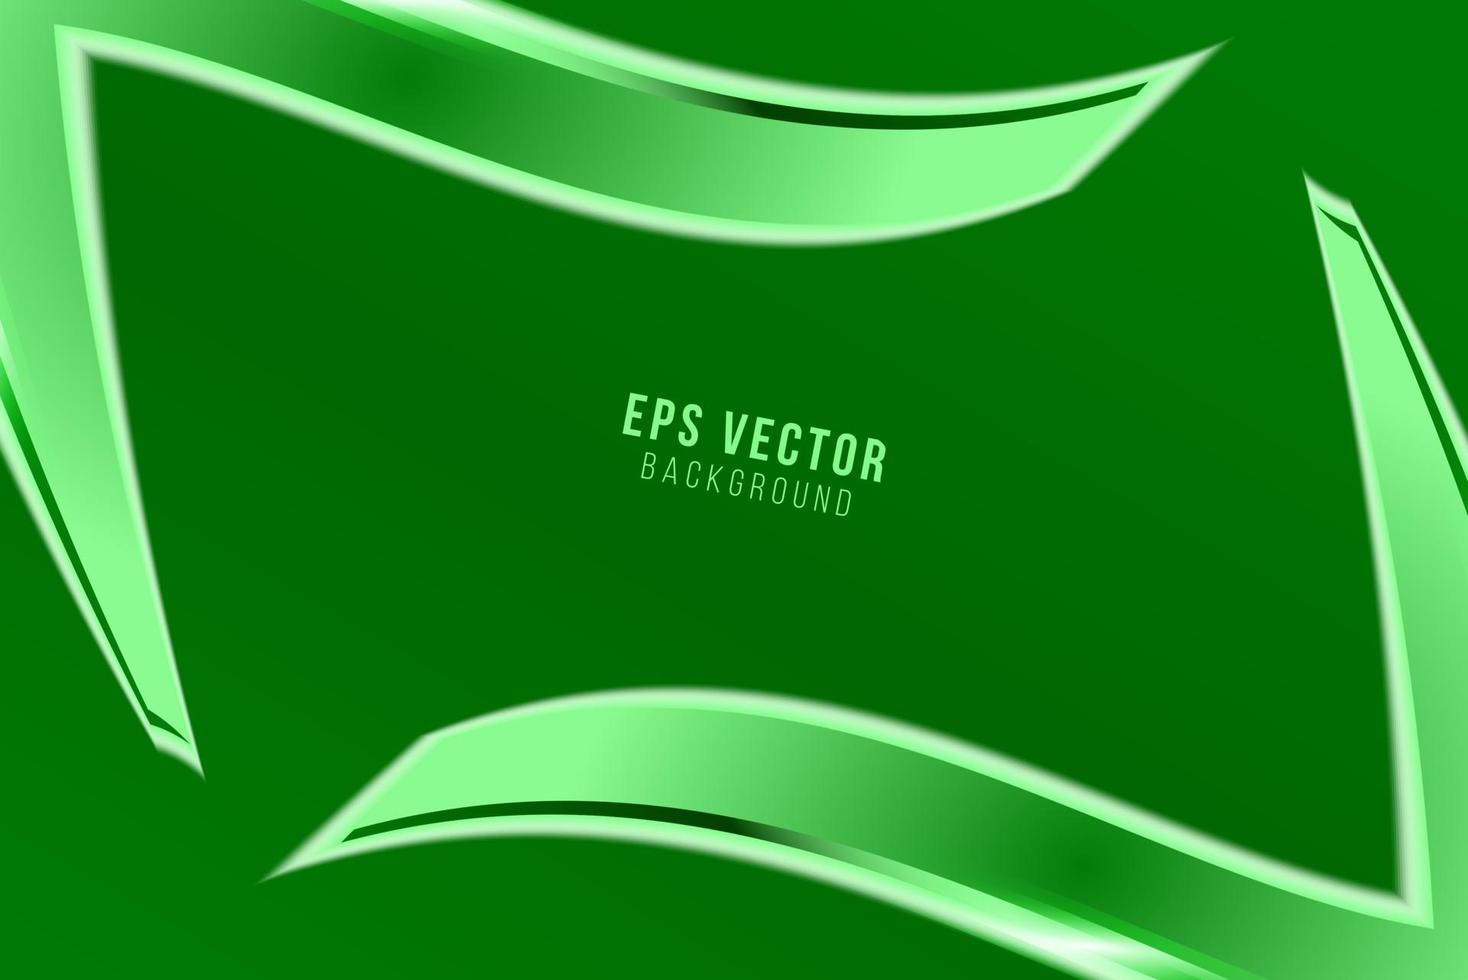 Minimal vector on halftone green  background. Abstract texture. Eps10 vector.